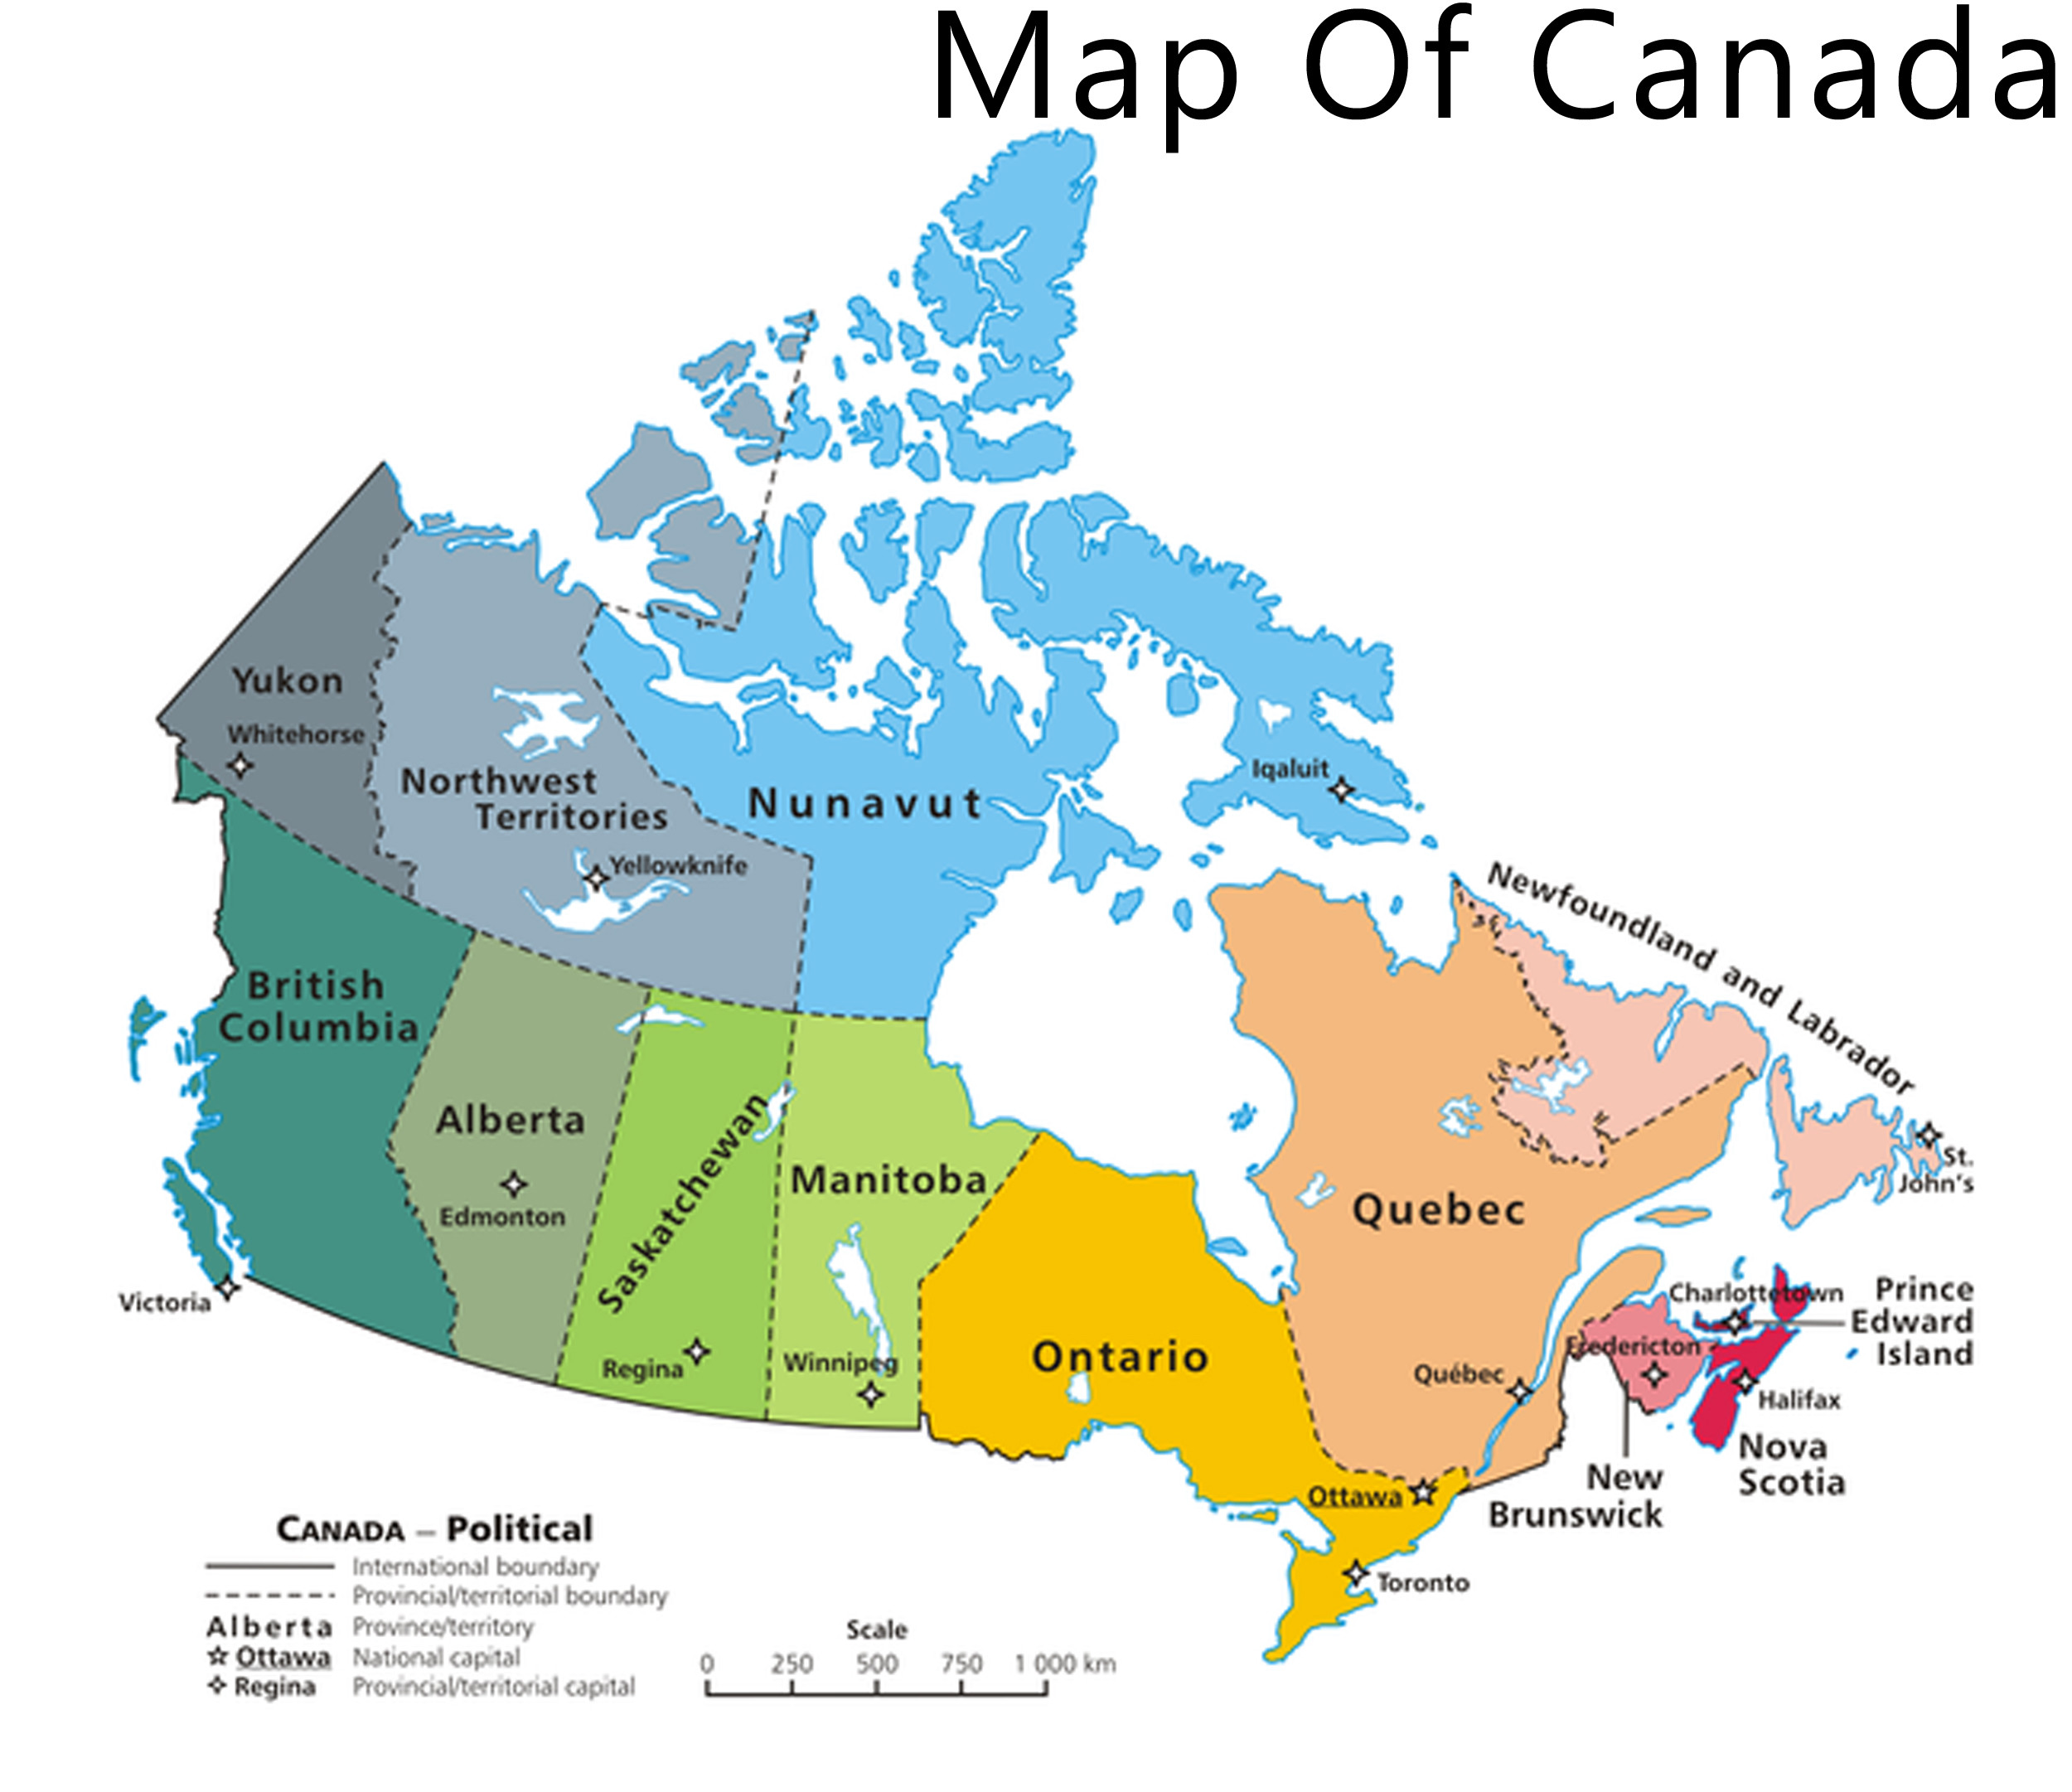  /><br /><br/><p>Canada Map Hd</p></center></center>
<div style='clear: both;'></div>
</div>
<div class='post-footer'>
<div class='post-footer-line post-footer-line-1'>
<div style=